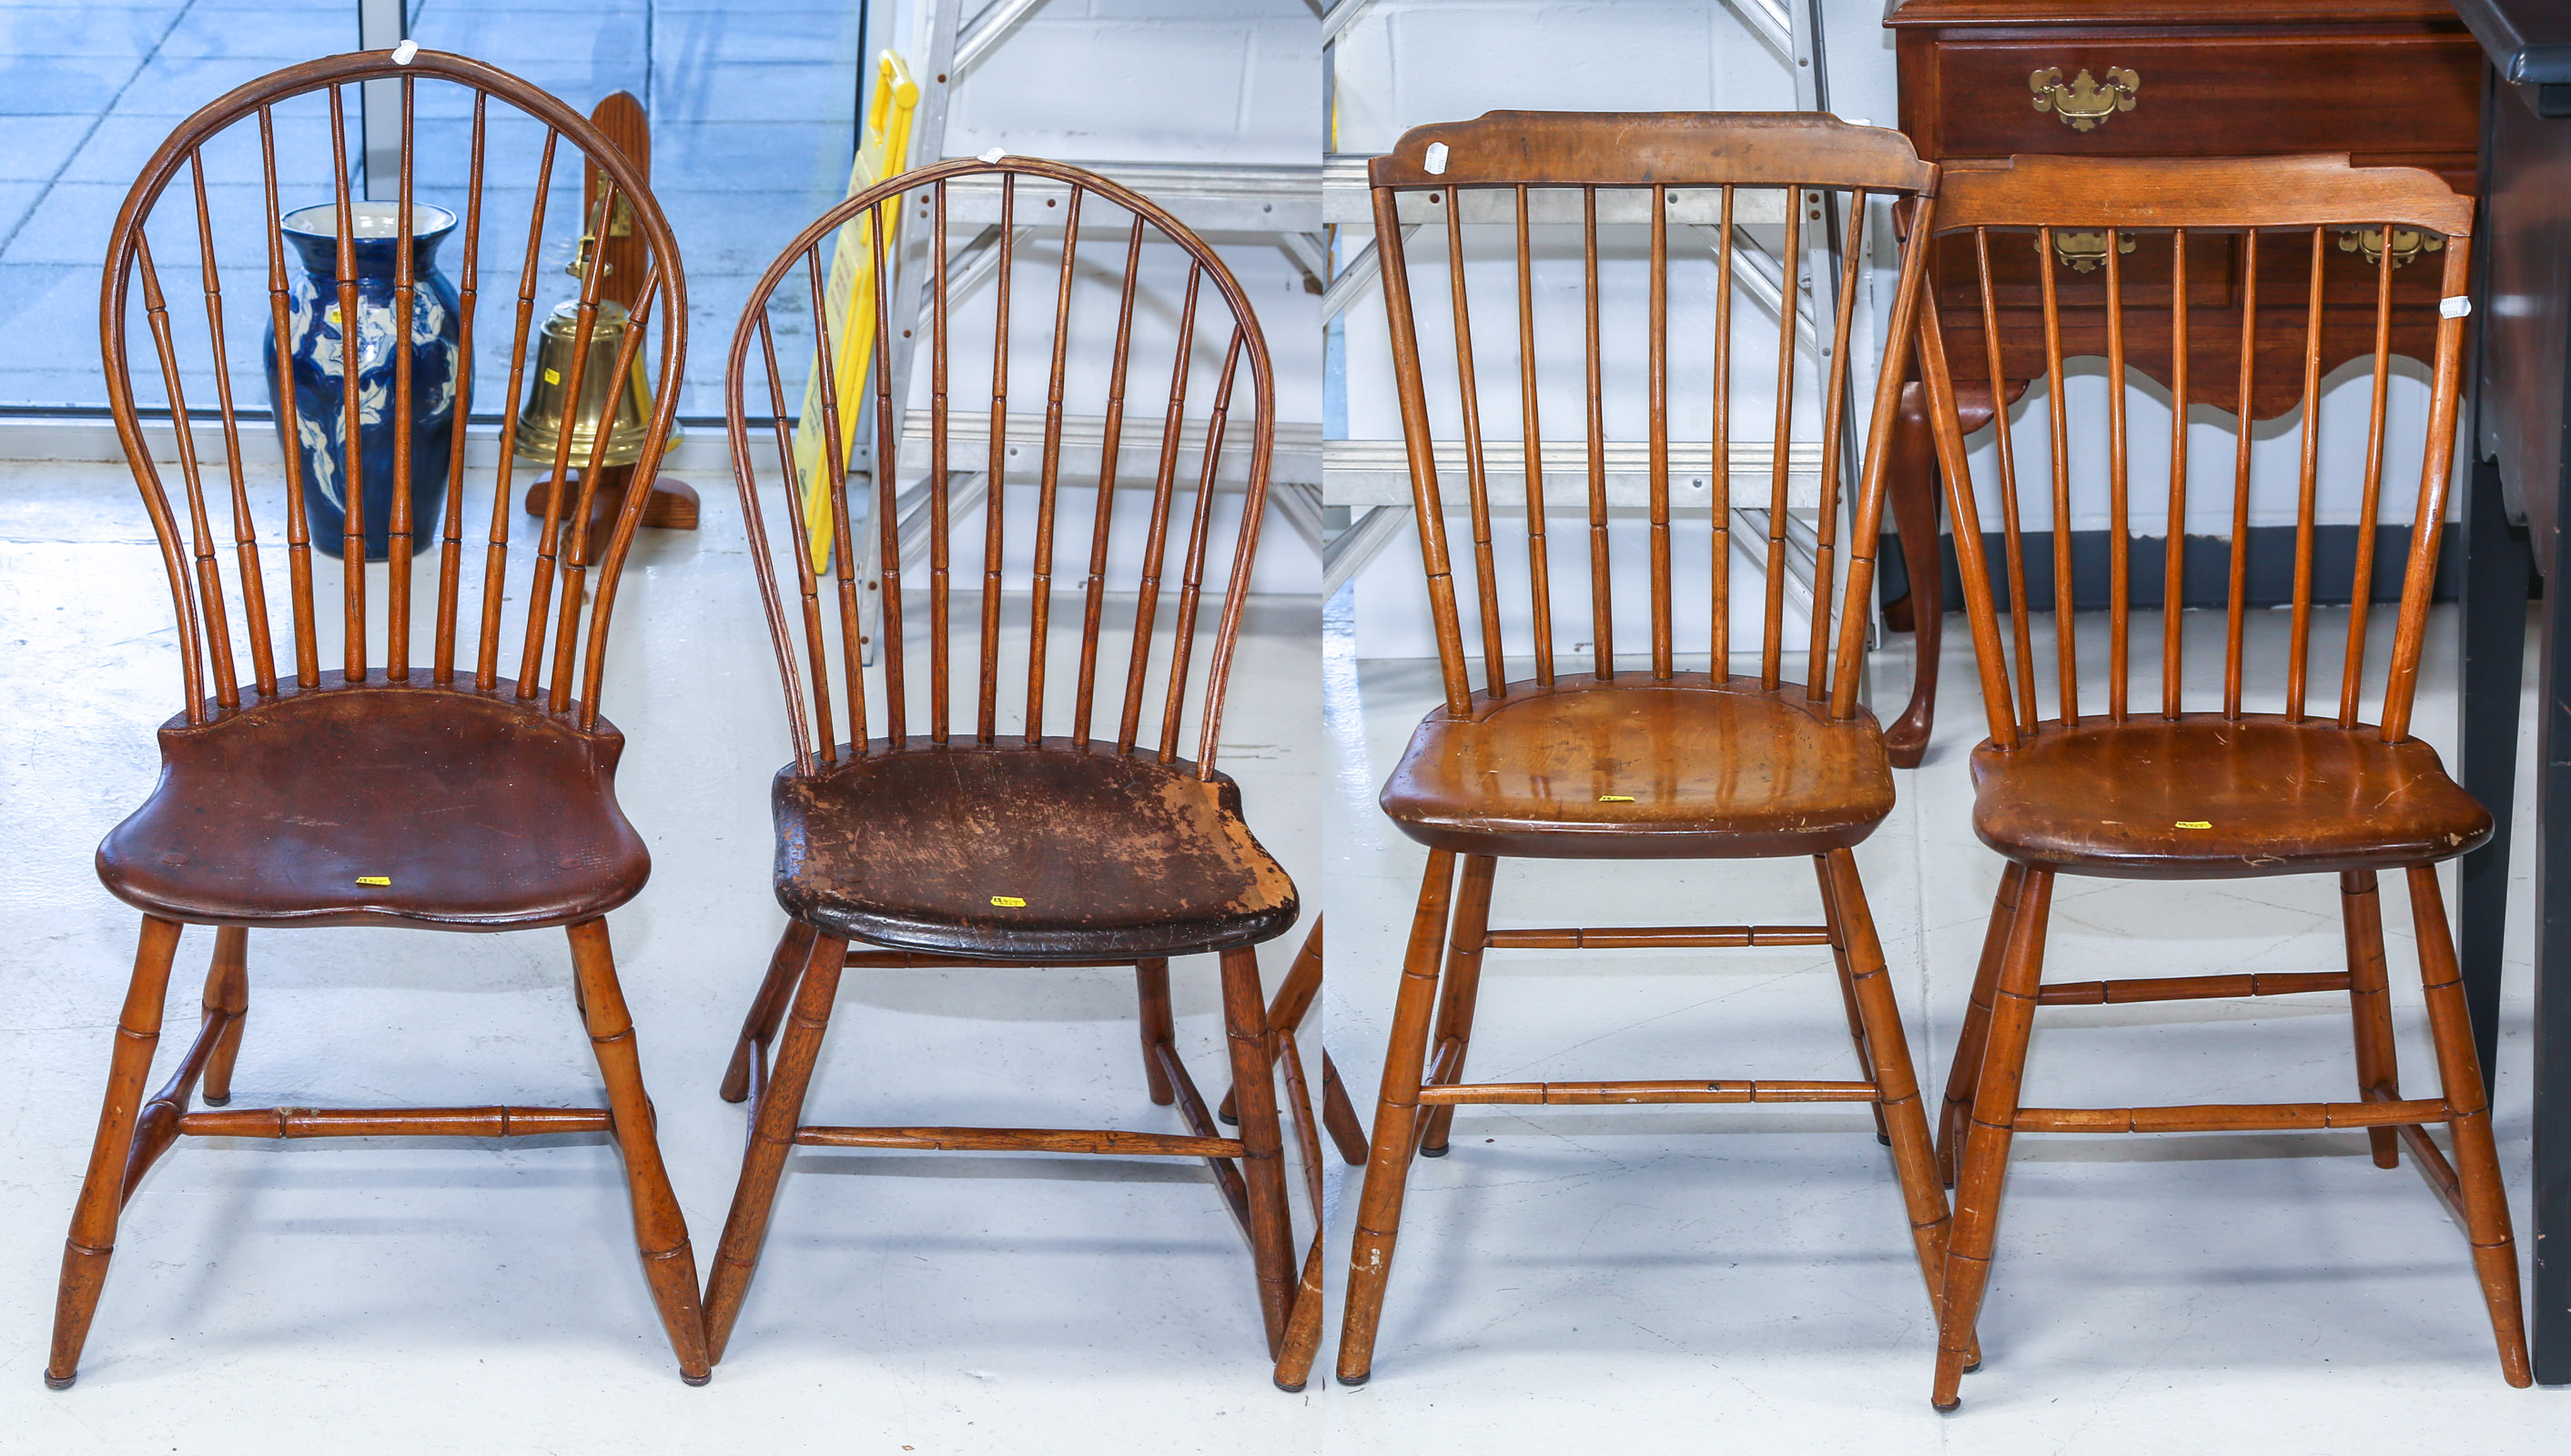 FOUR ANTIQUE WINDSOR SIDE CHAIRS 2e949a